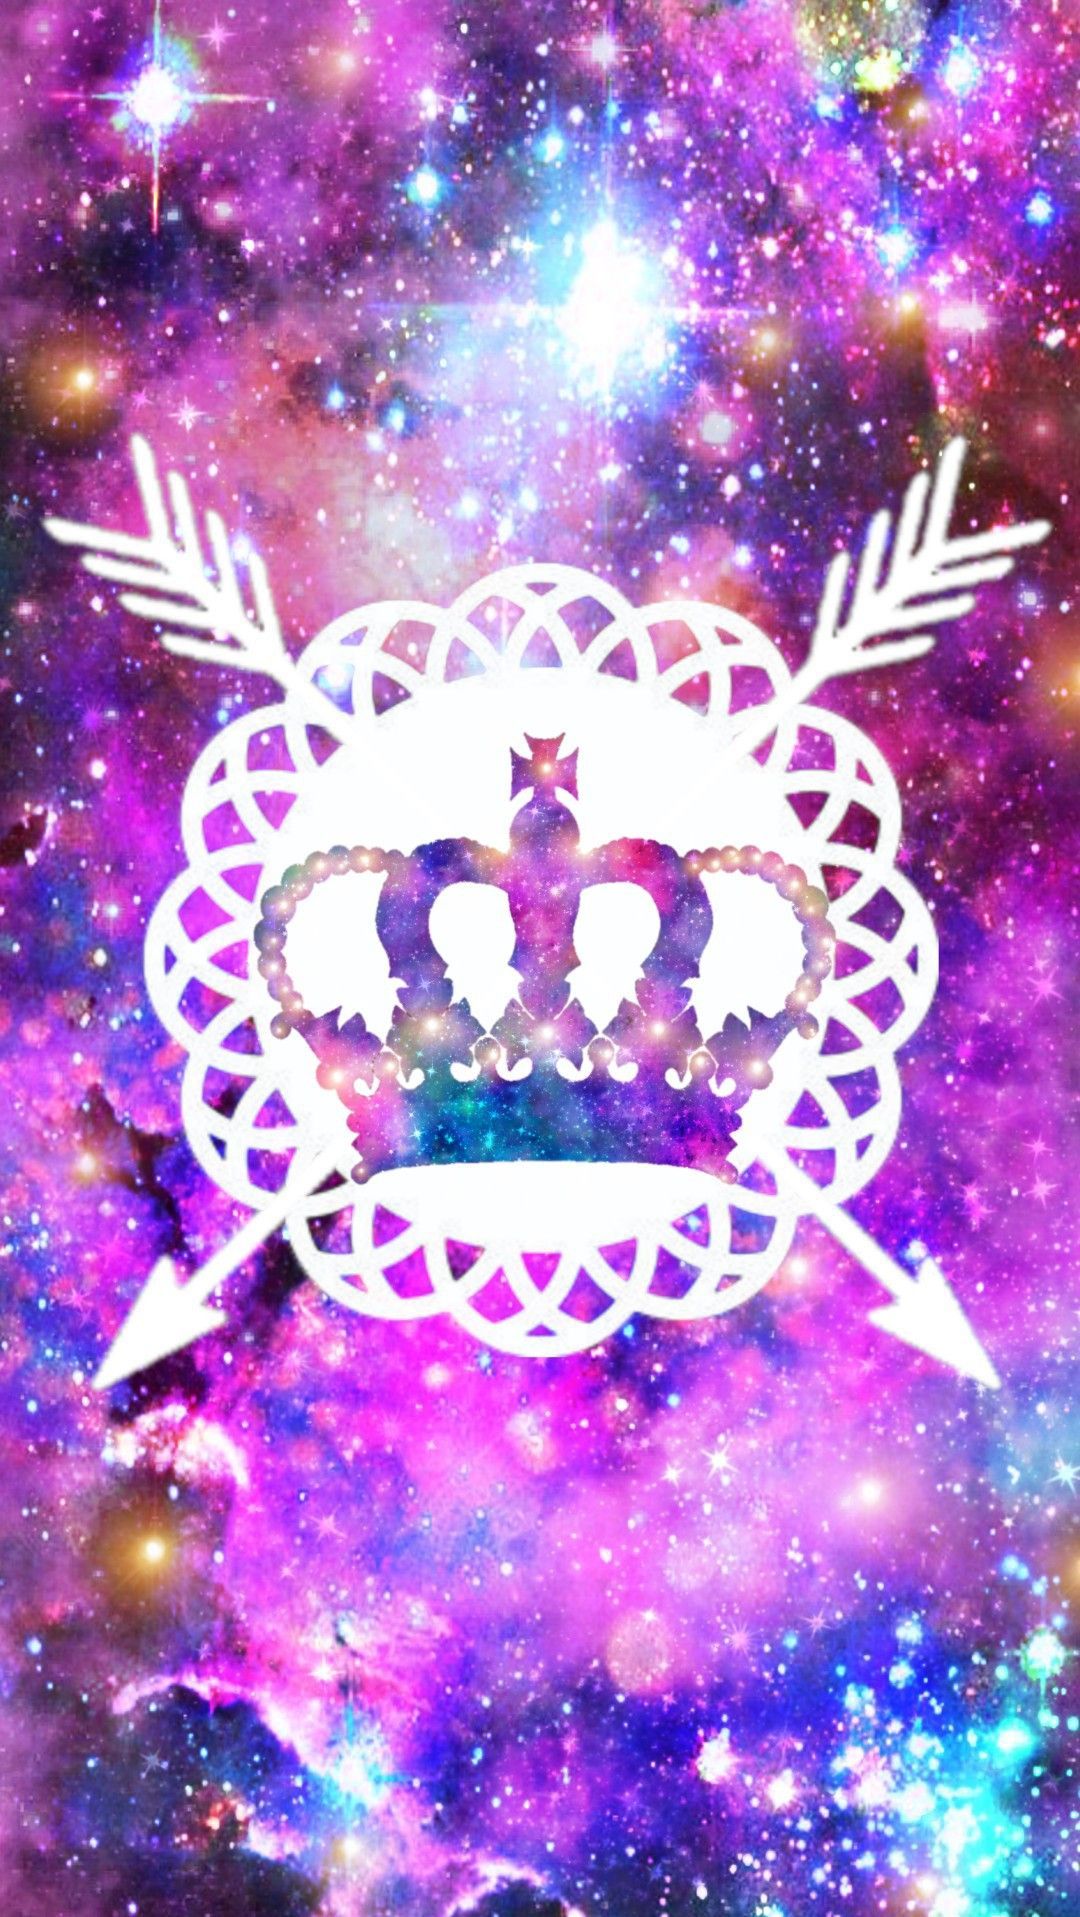 Royal Crown Galaxy, made by me #purple #sparkly #wallpaper #background #glitter #sparkles #galaxy #crown #roy. Crown background, iPhone background, Background